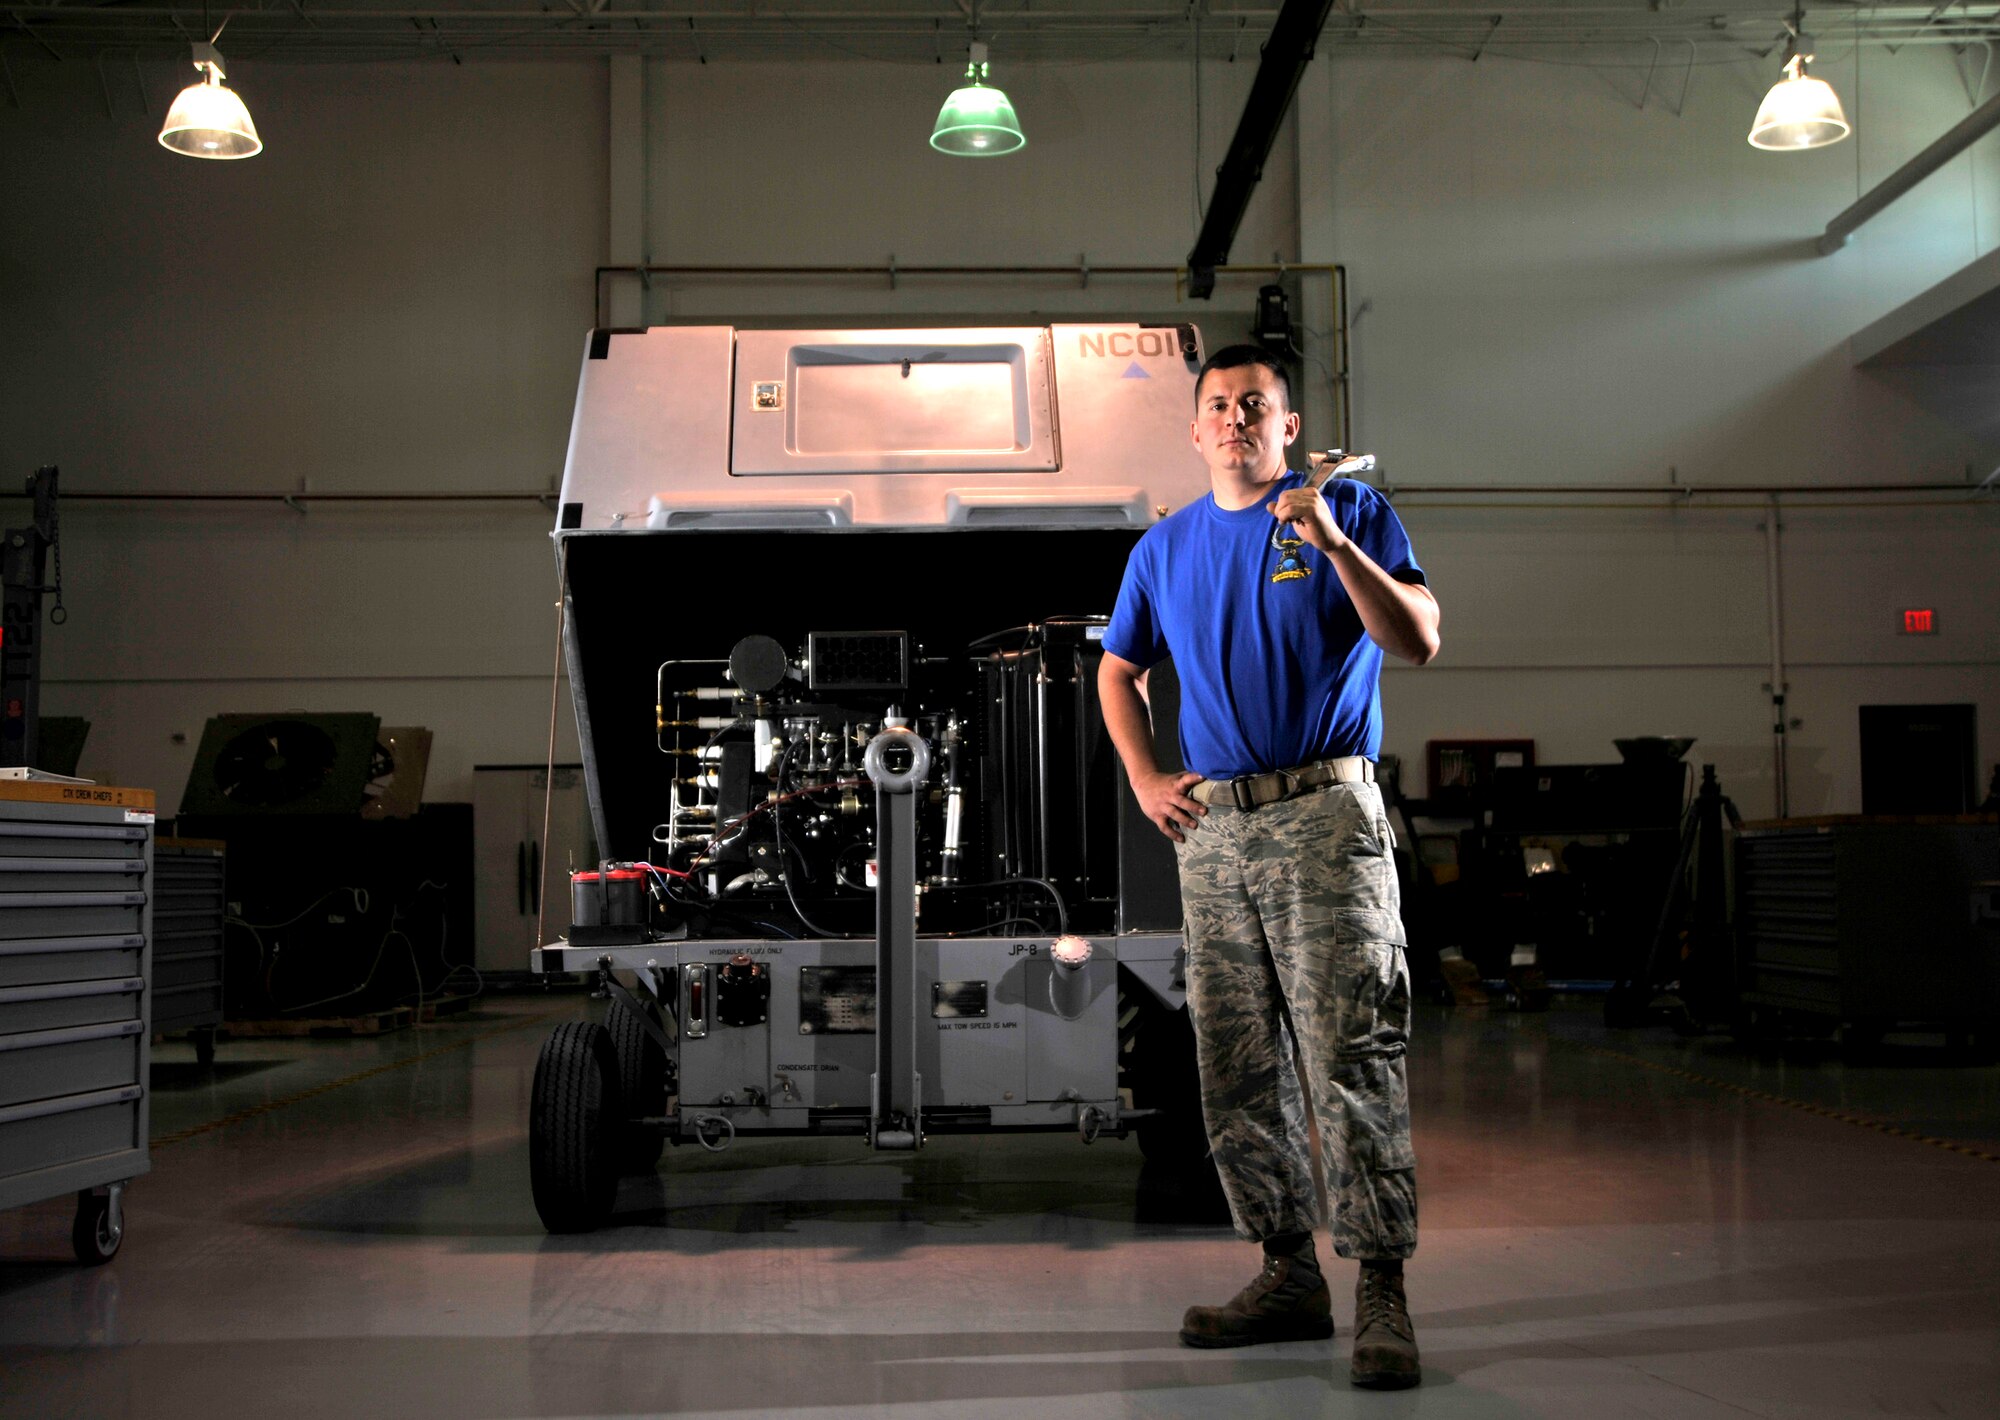 Tech Sgt. Kasey Hollinger, 432nd Maintenance Squadron aerospace ground equipment craftsman, poses next to self generating nitrogen cart May 19, 2015 at Creech Air Force Base, Nevada. The self-generating nitrogen cart is used to separate nitrogen from the oxygen in the air and compresses it to be used to inflate age equipment and aircraft tires. (U.S. Air Force photo by Senior Airman Adarius Petty/Released)